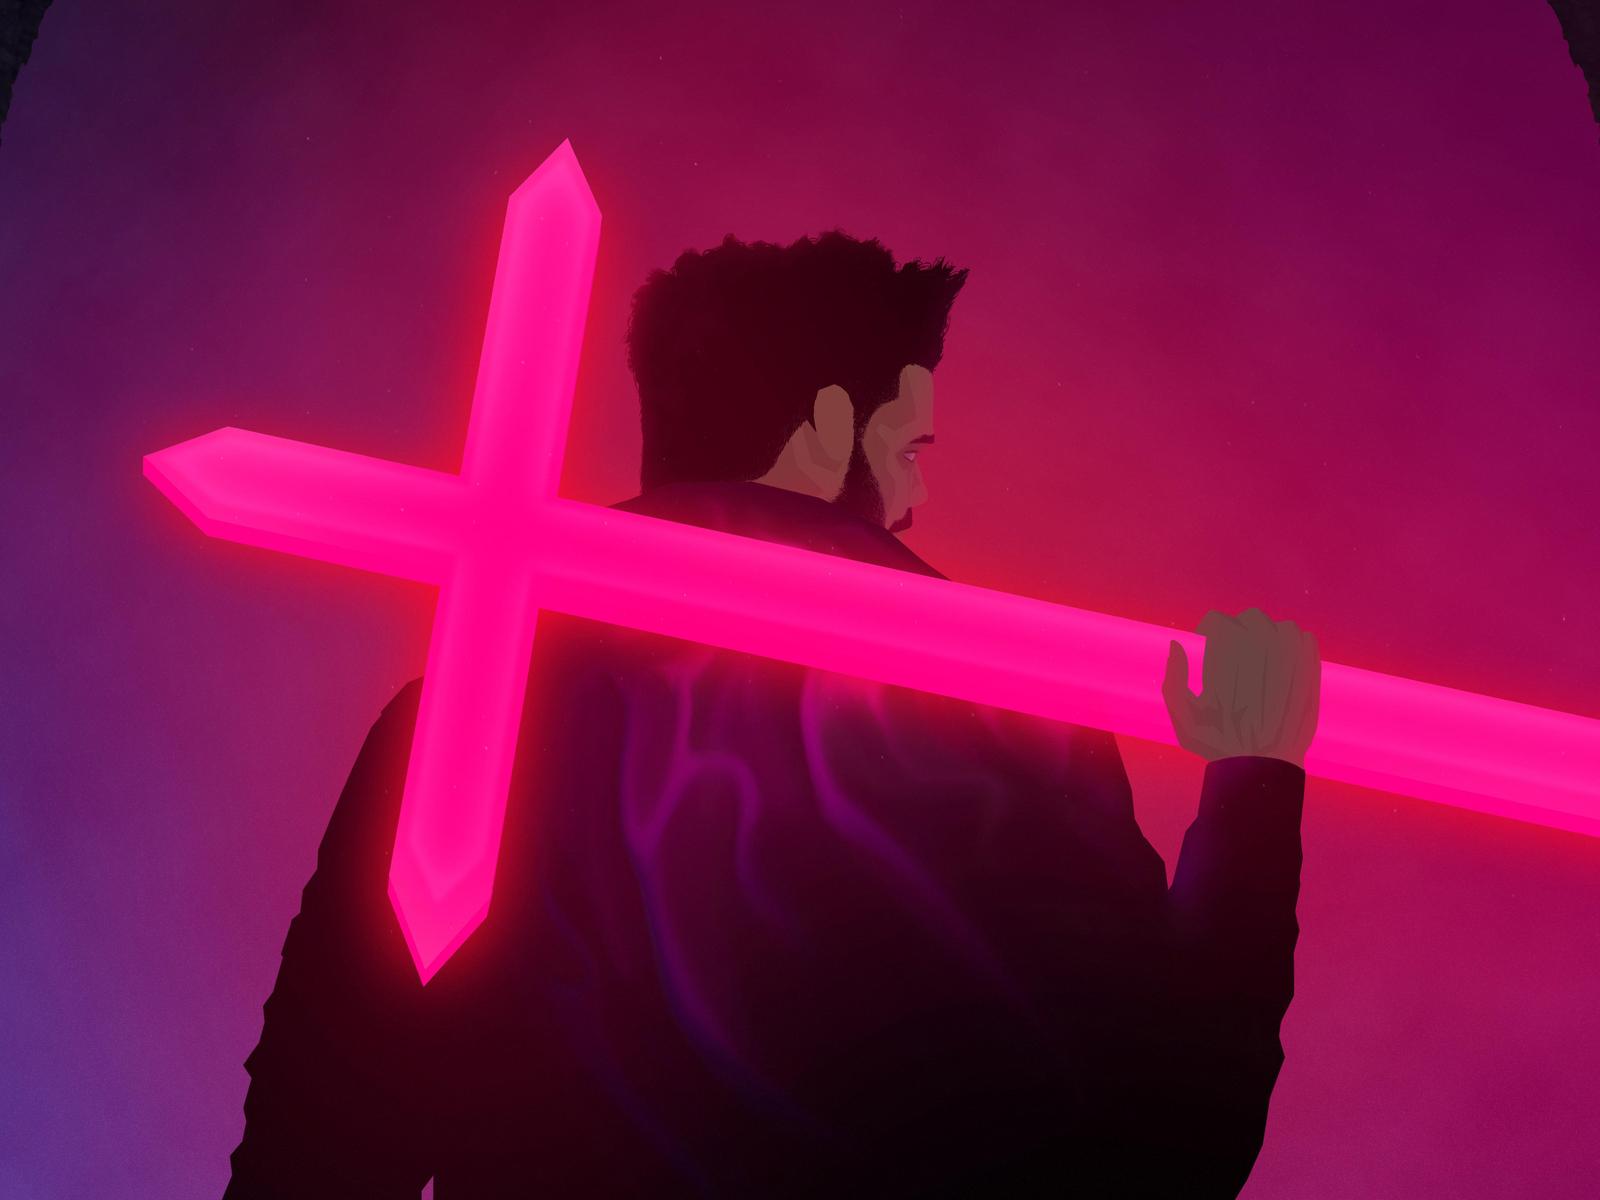 The Weeknd Starboy Wallpapers - Top Free The Weeknd Starboy Backgrounds ...